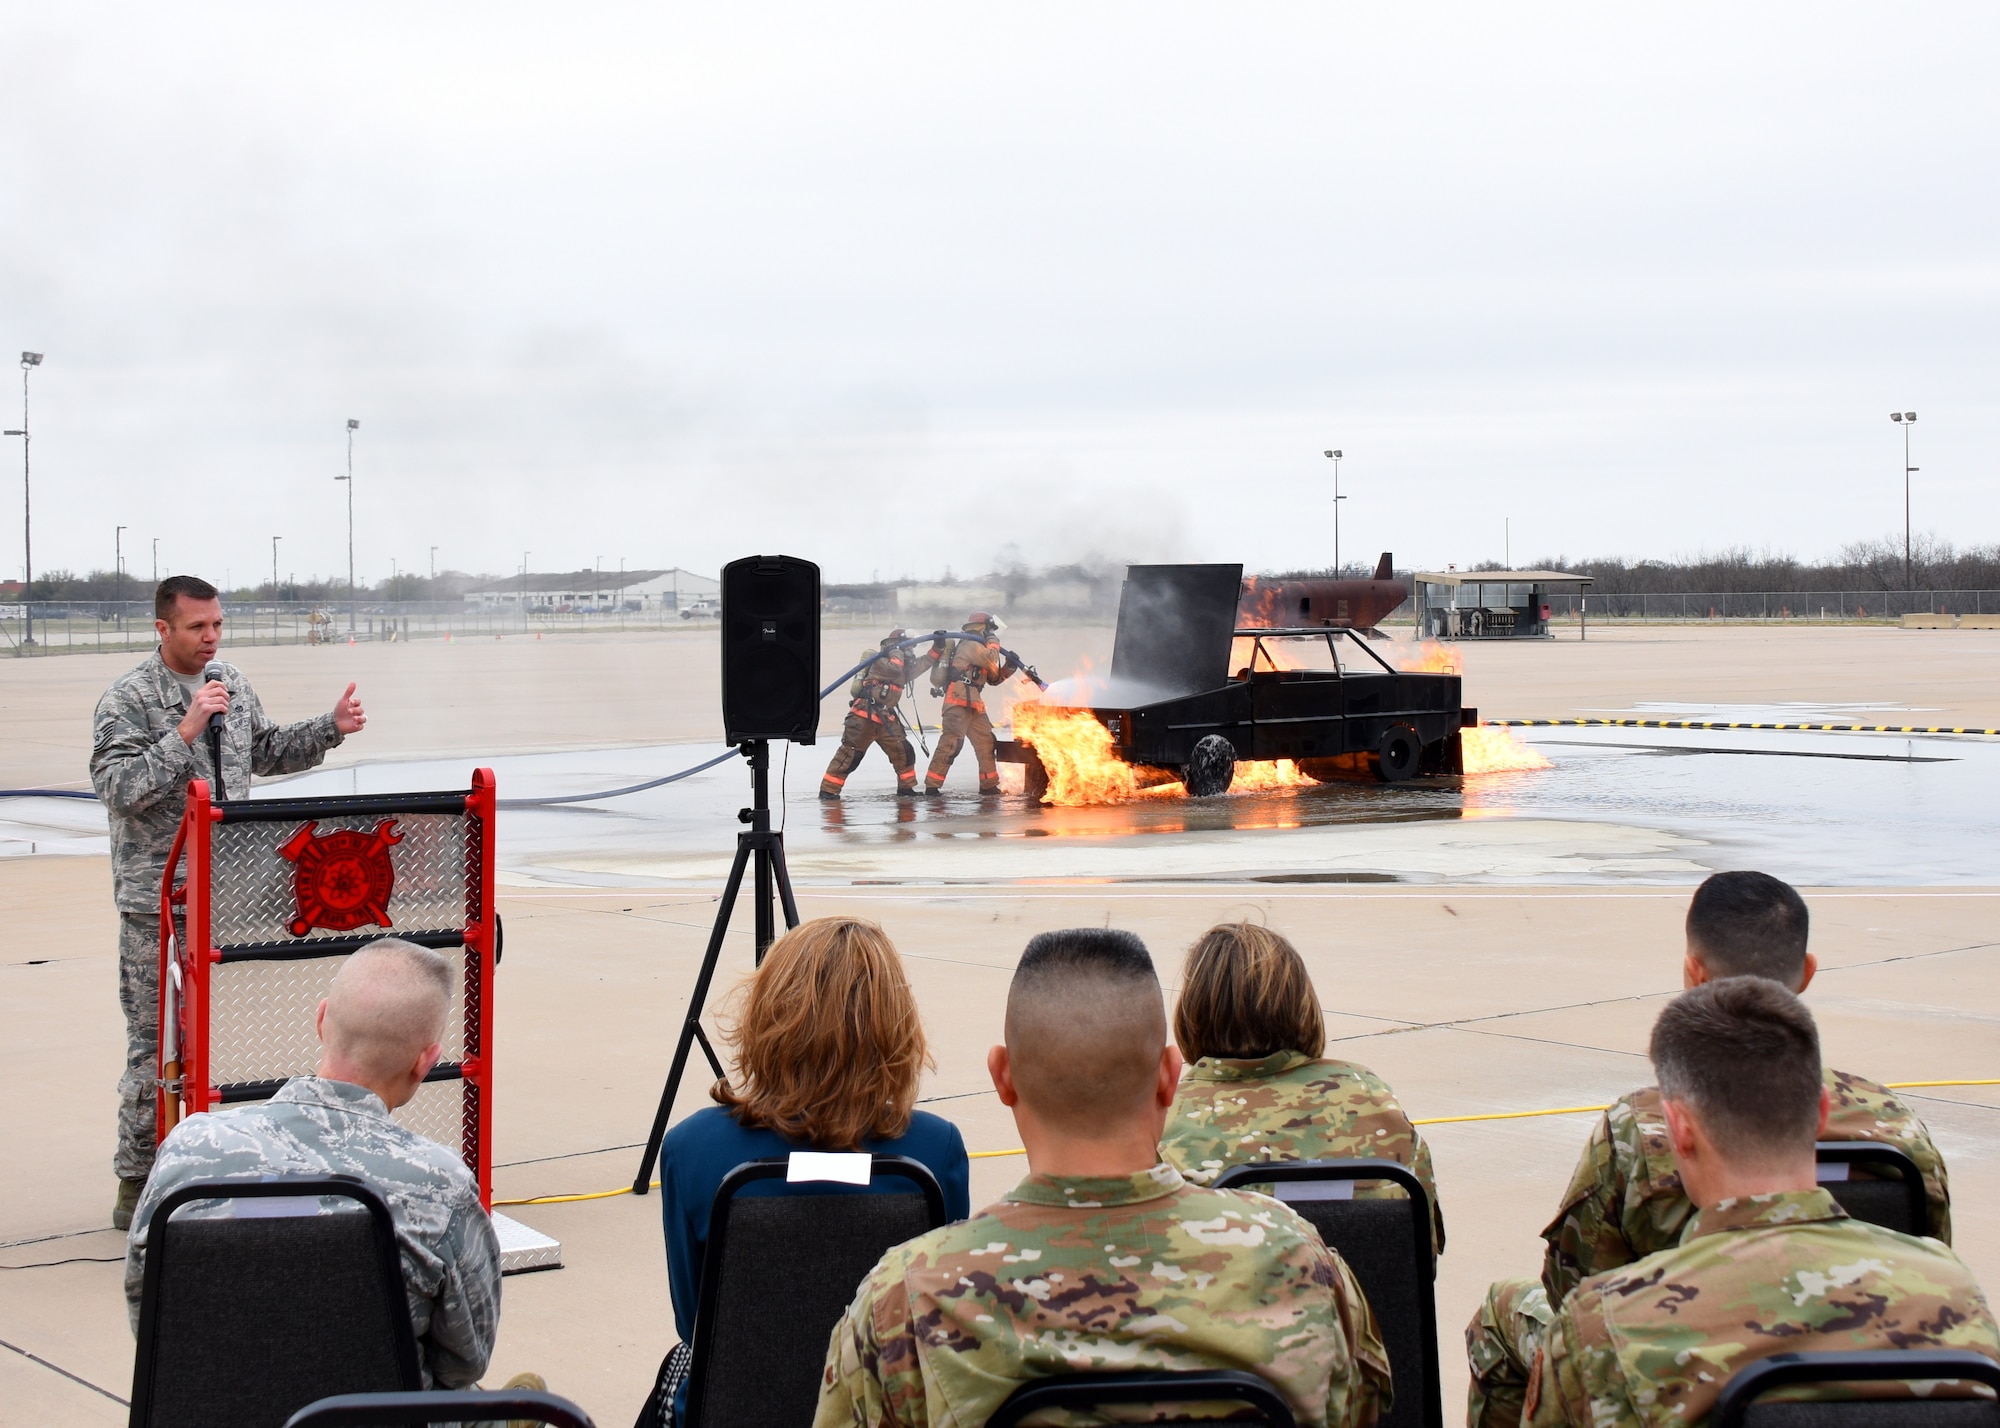 U.S. Air Force Tech. Sgt. Jayton Washington, 312th Training Squadron instructor, discusses the advantages of the new mobile fire pumps during a demonstration at the Louis F. Garland Department of Defense Fire Academy on Goodfellow Air Force Base, Texas, March 20, 2019. The pumps are easier to transport to difficult locations and each pump allows two fire engines to be returned to storage. (U.S. Air Force photo by Airman 1st Class Zachary Chapman/Released)